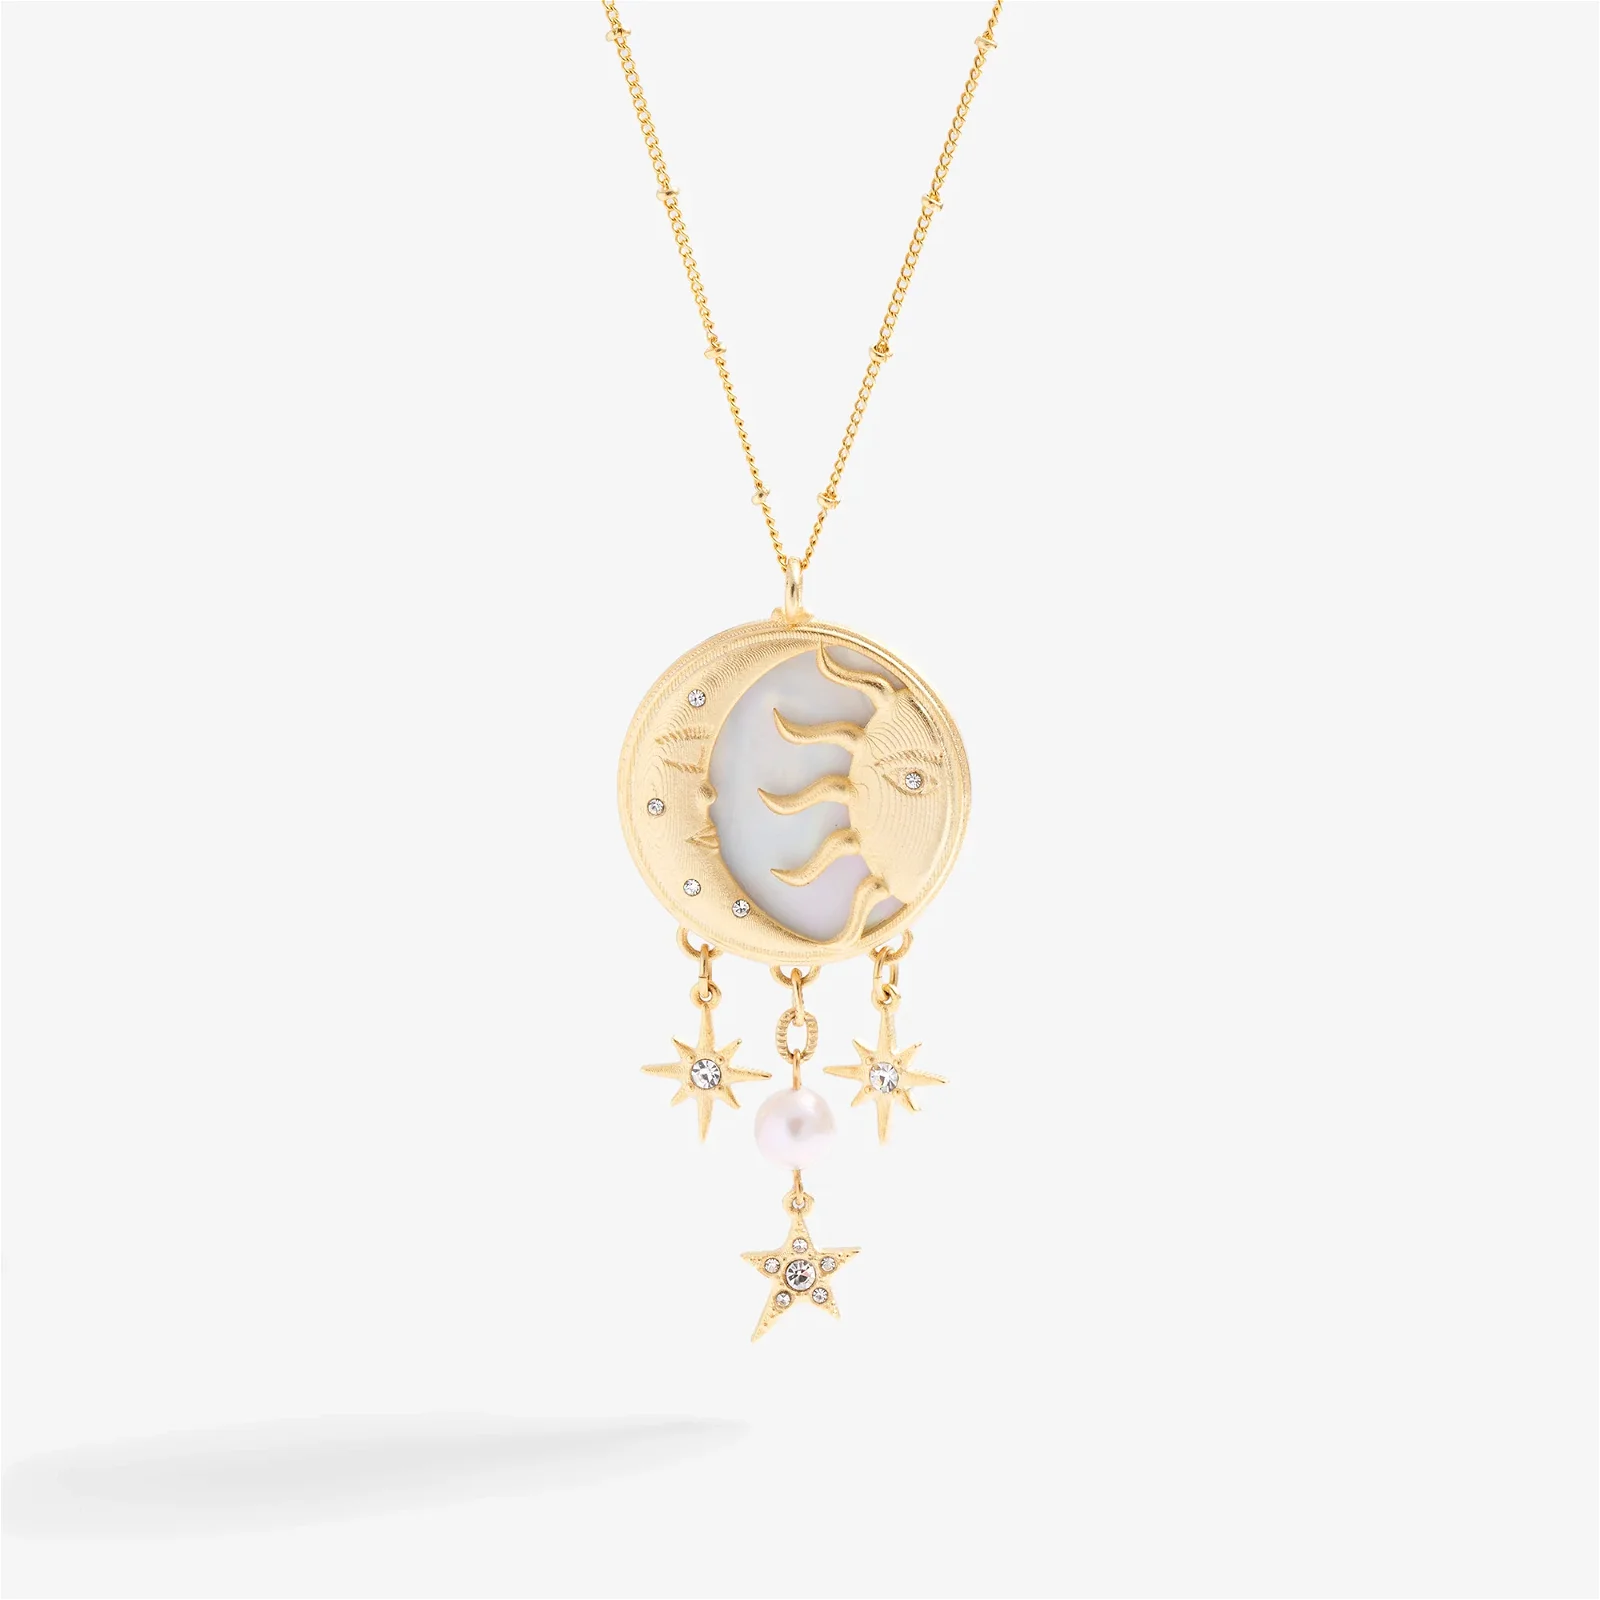 Image of Moon and Sun Multicharm Necklace